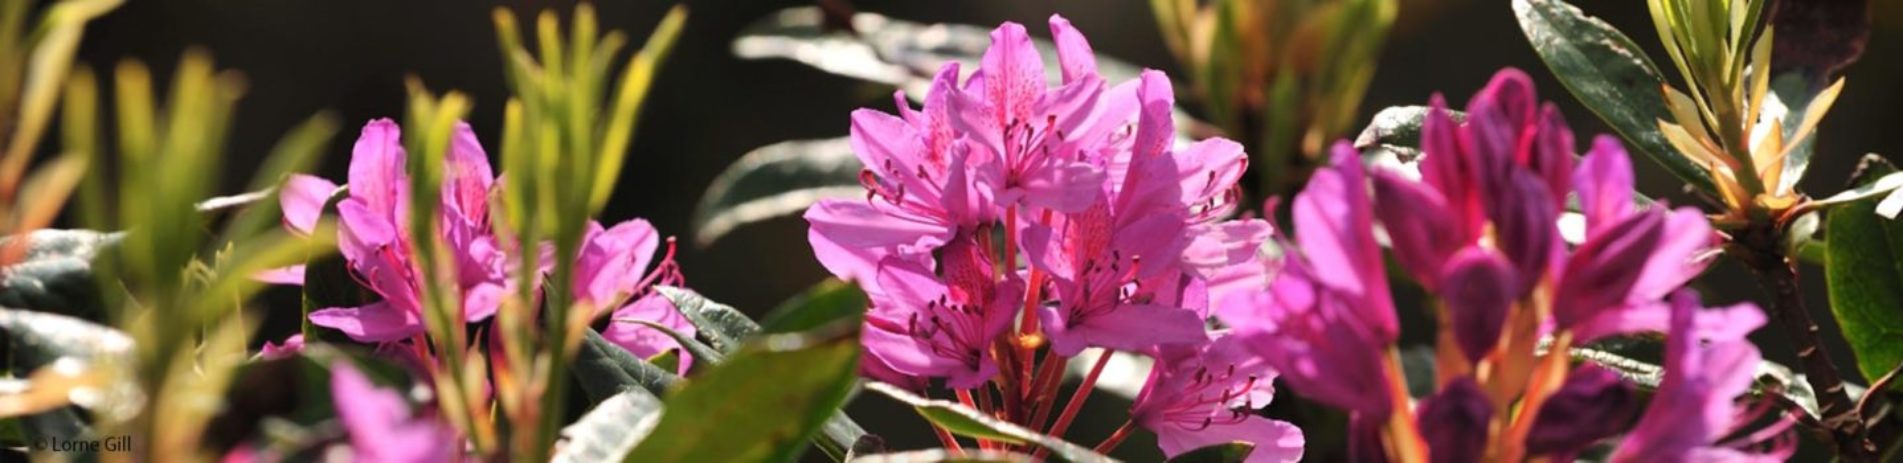 close-up-of-pink-rhododendron-flowers